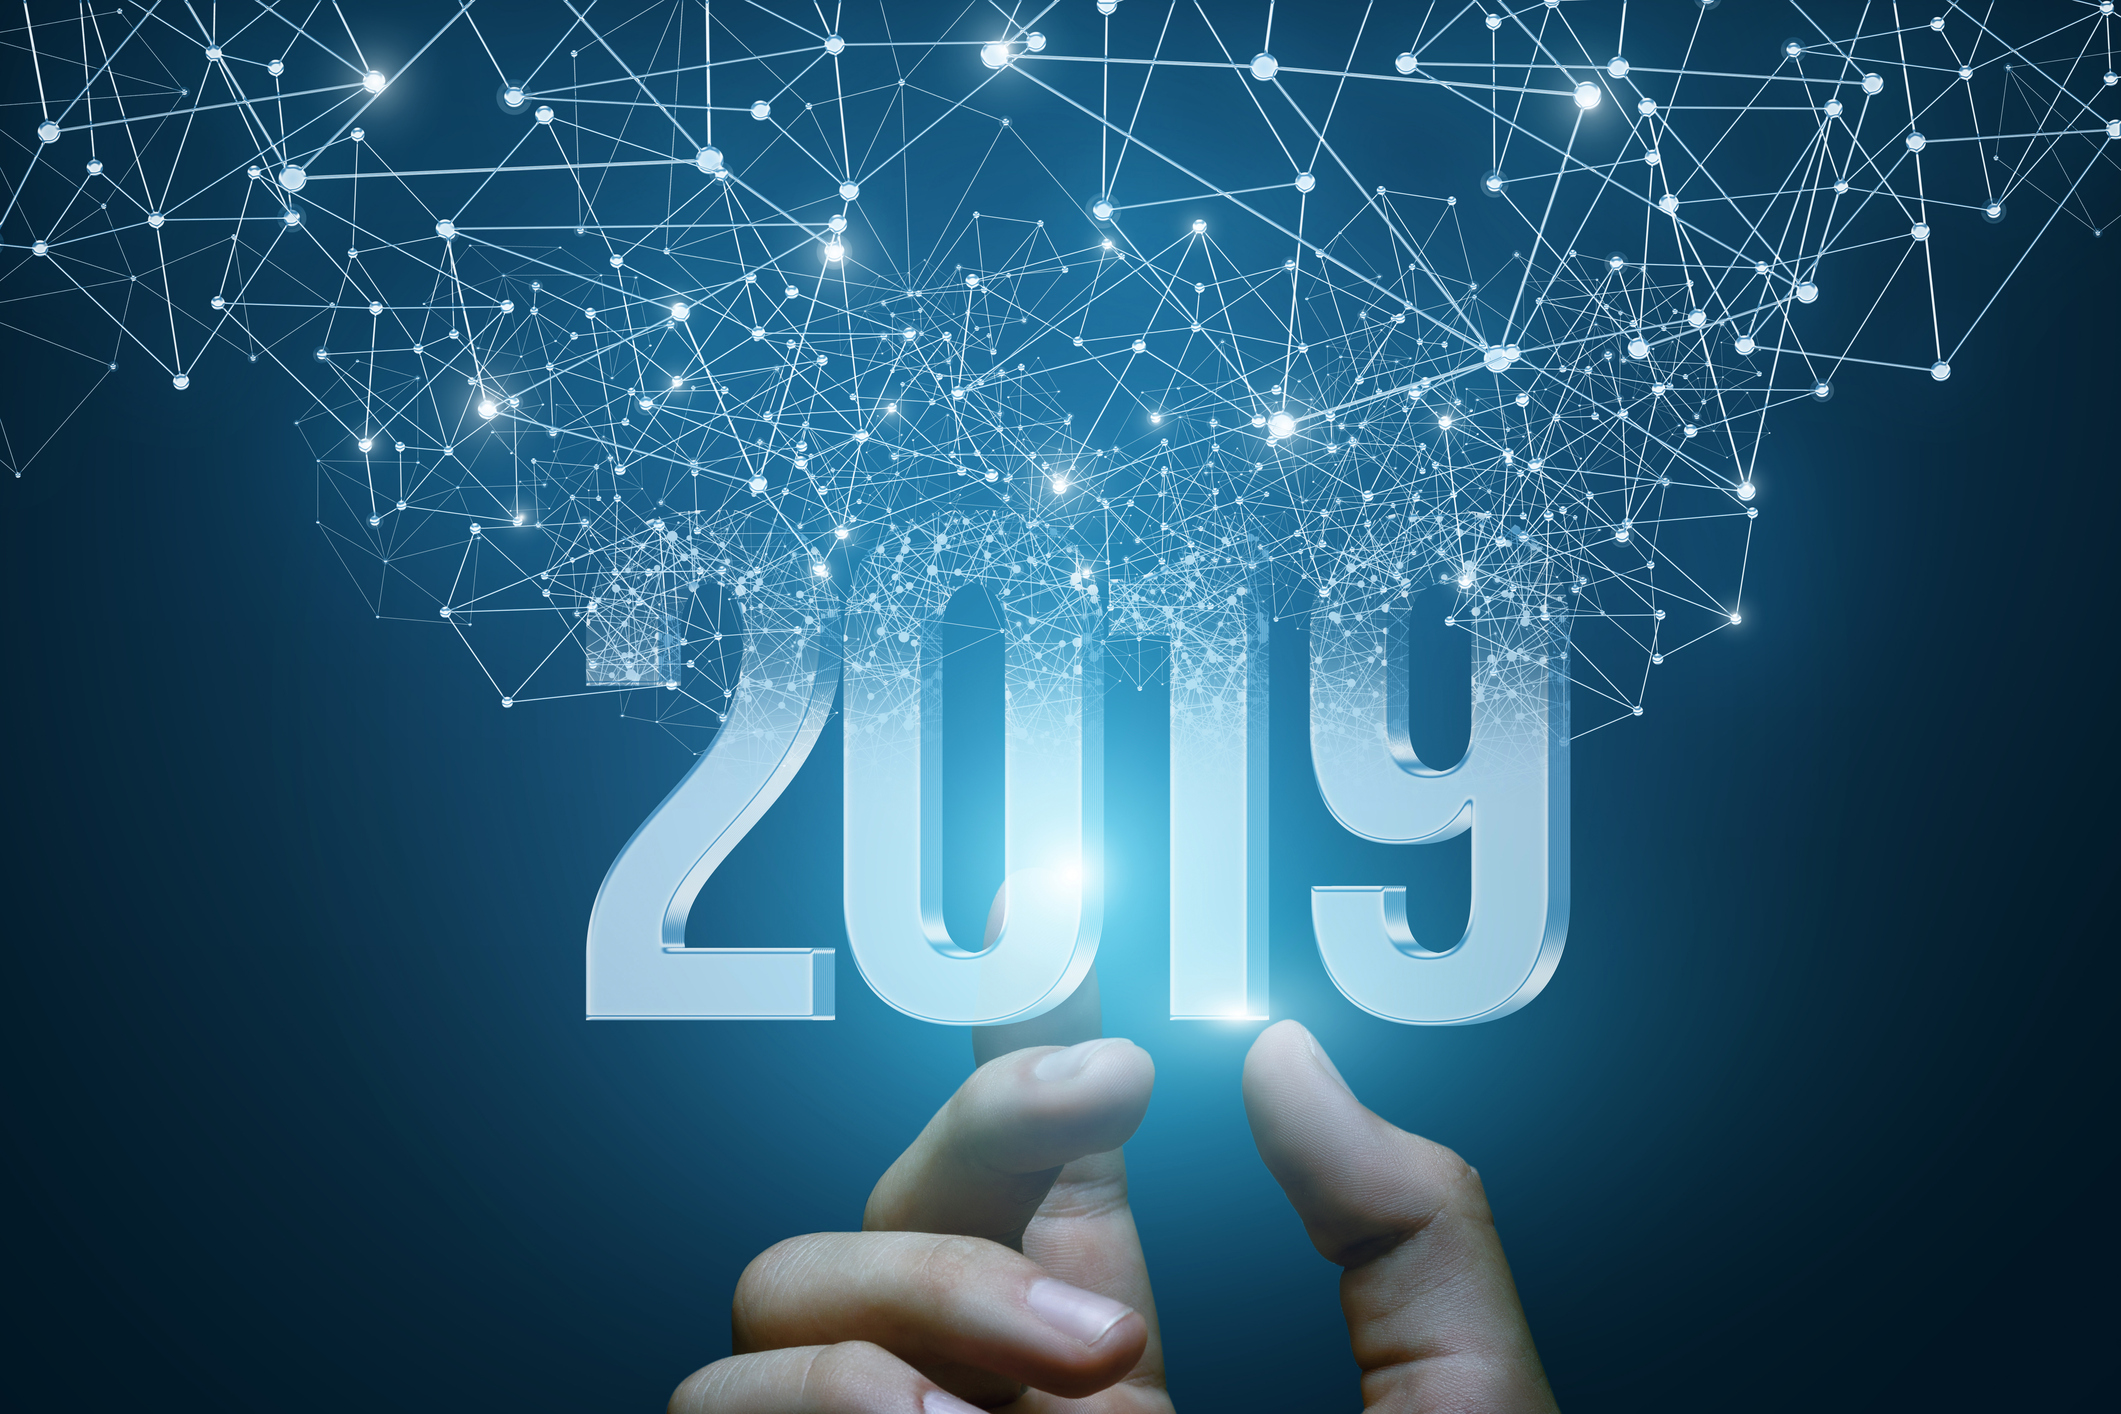 What’s in Store for 2019: Retail Marketing and Point-of-Purchase Industry Trends